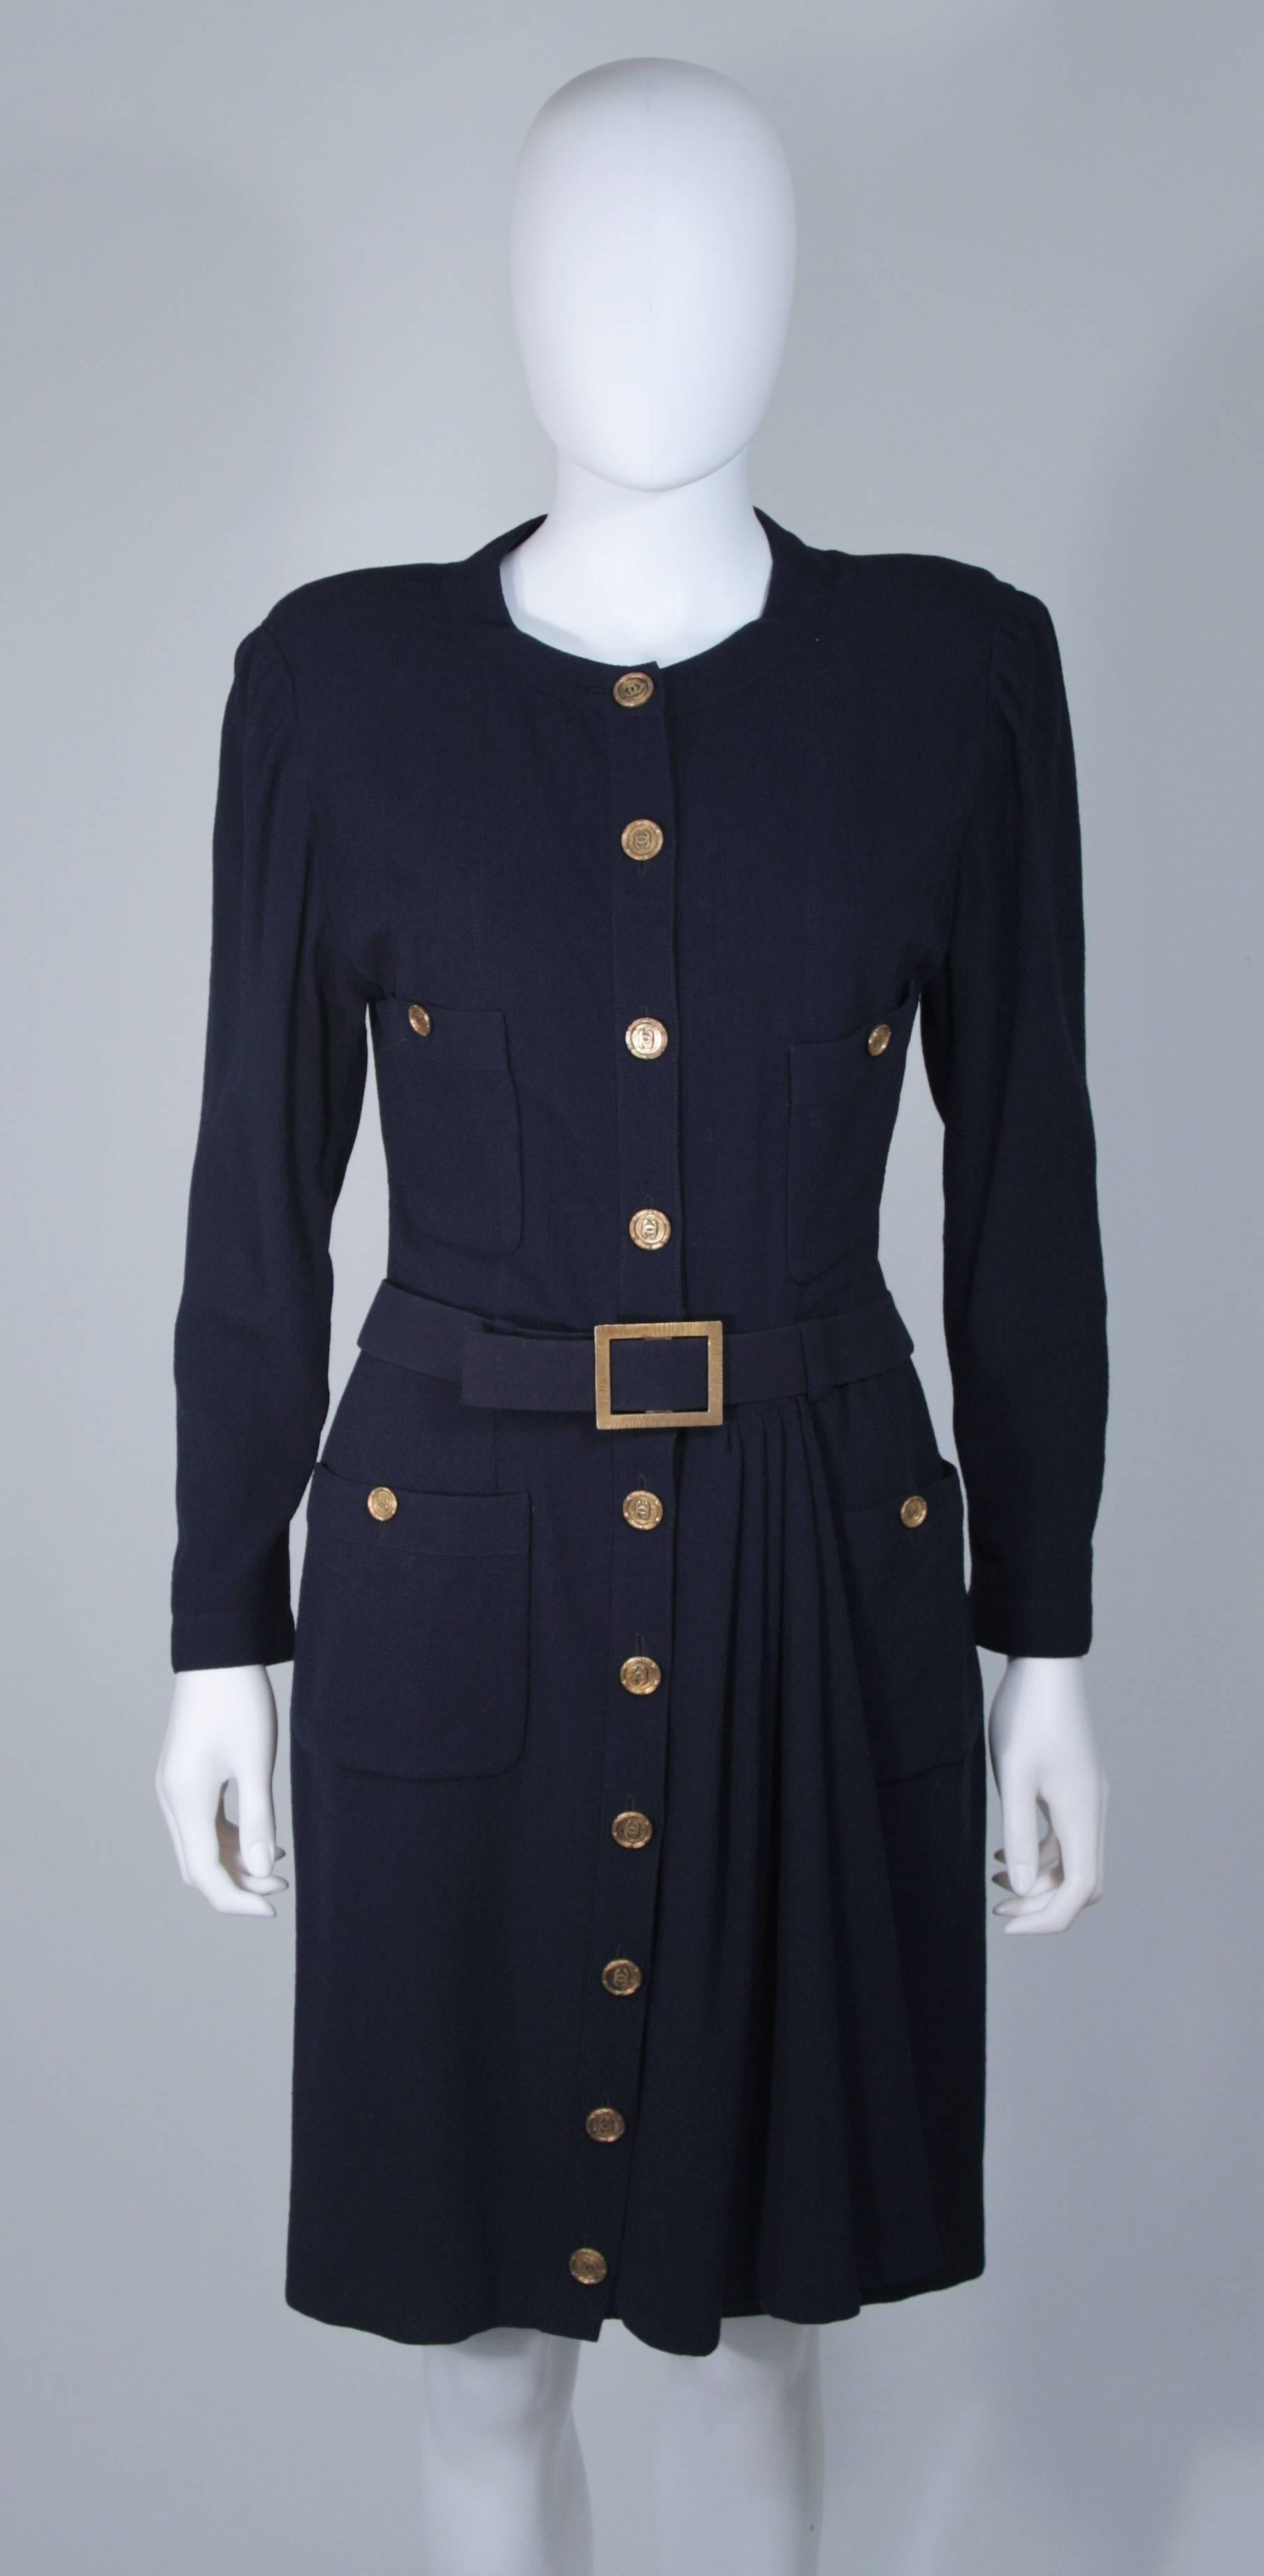 Black CHANEL Attributed Navy Drape Dress with Belt & Gold Textured Logo Buttons Size 6